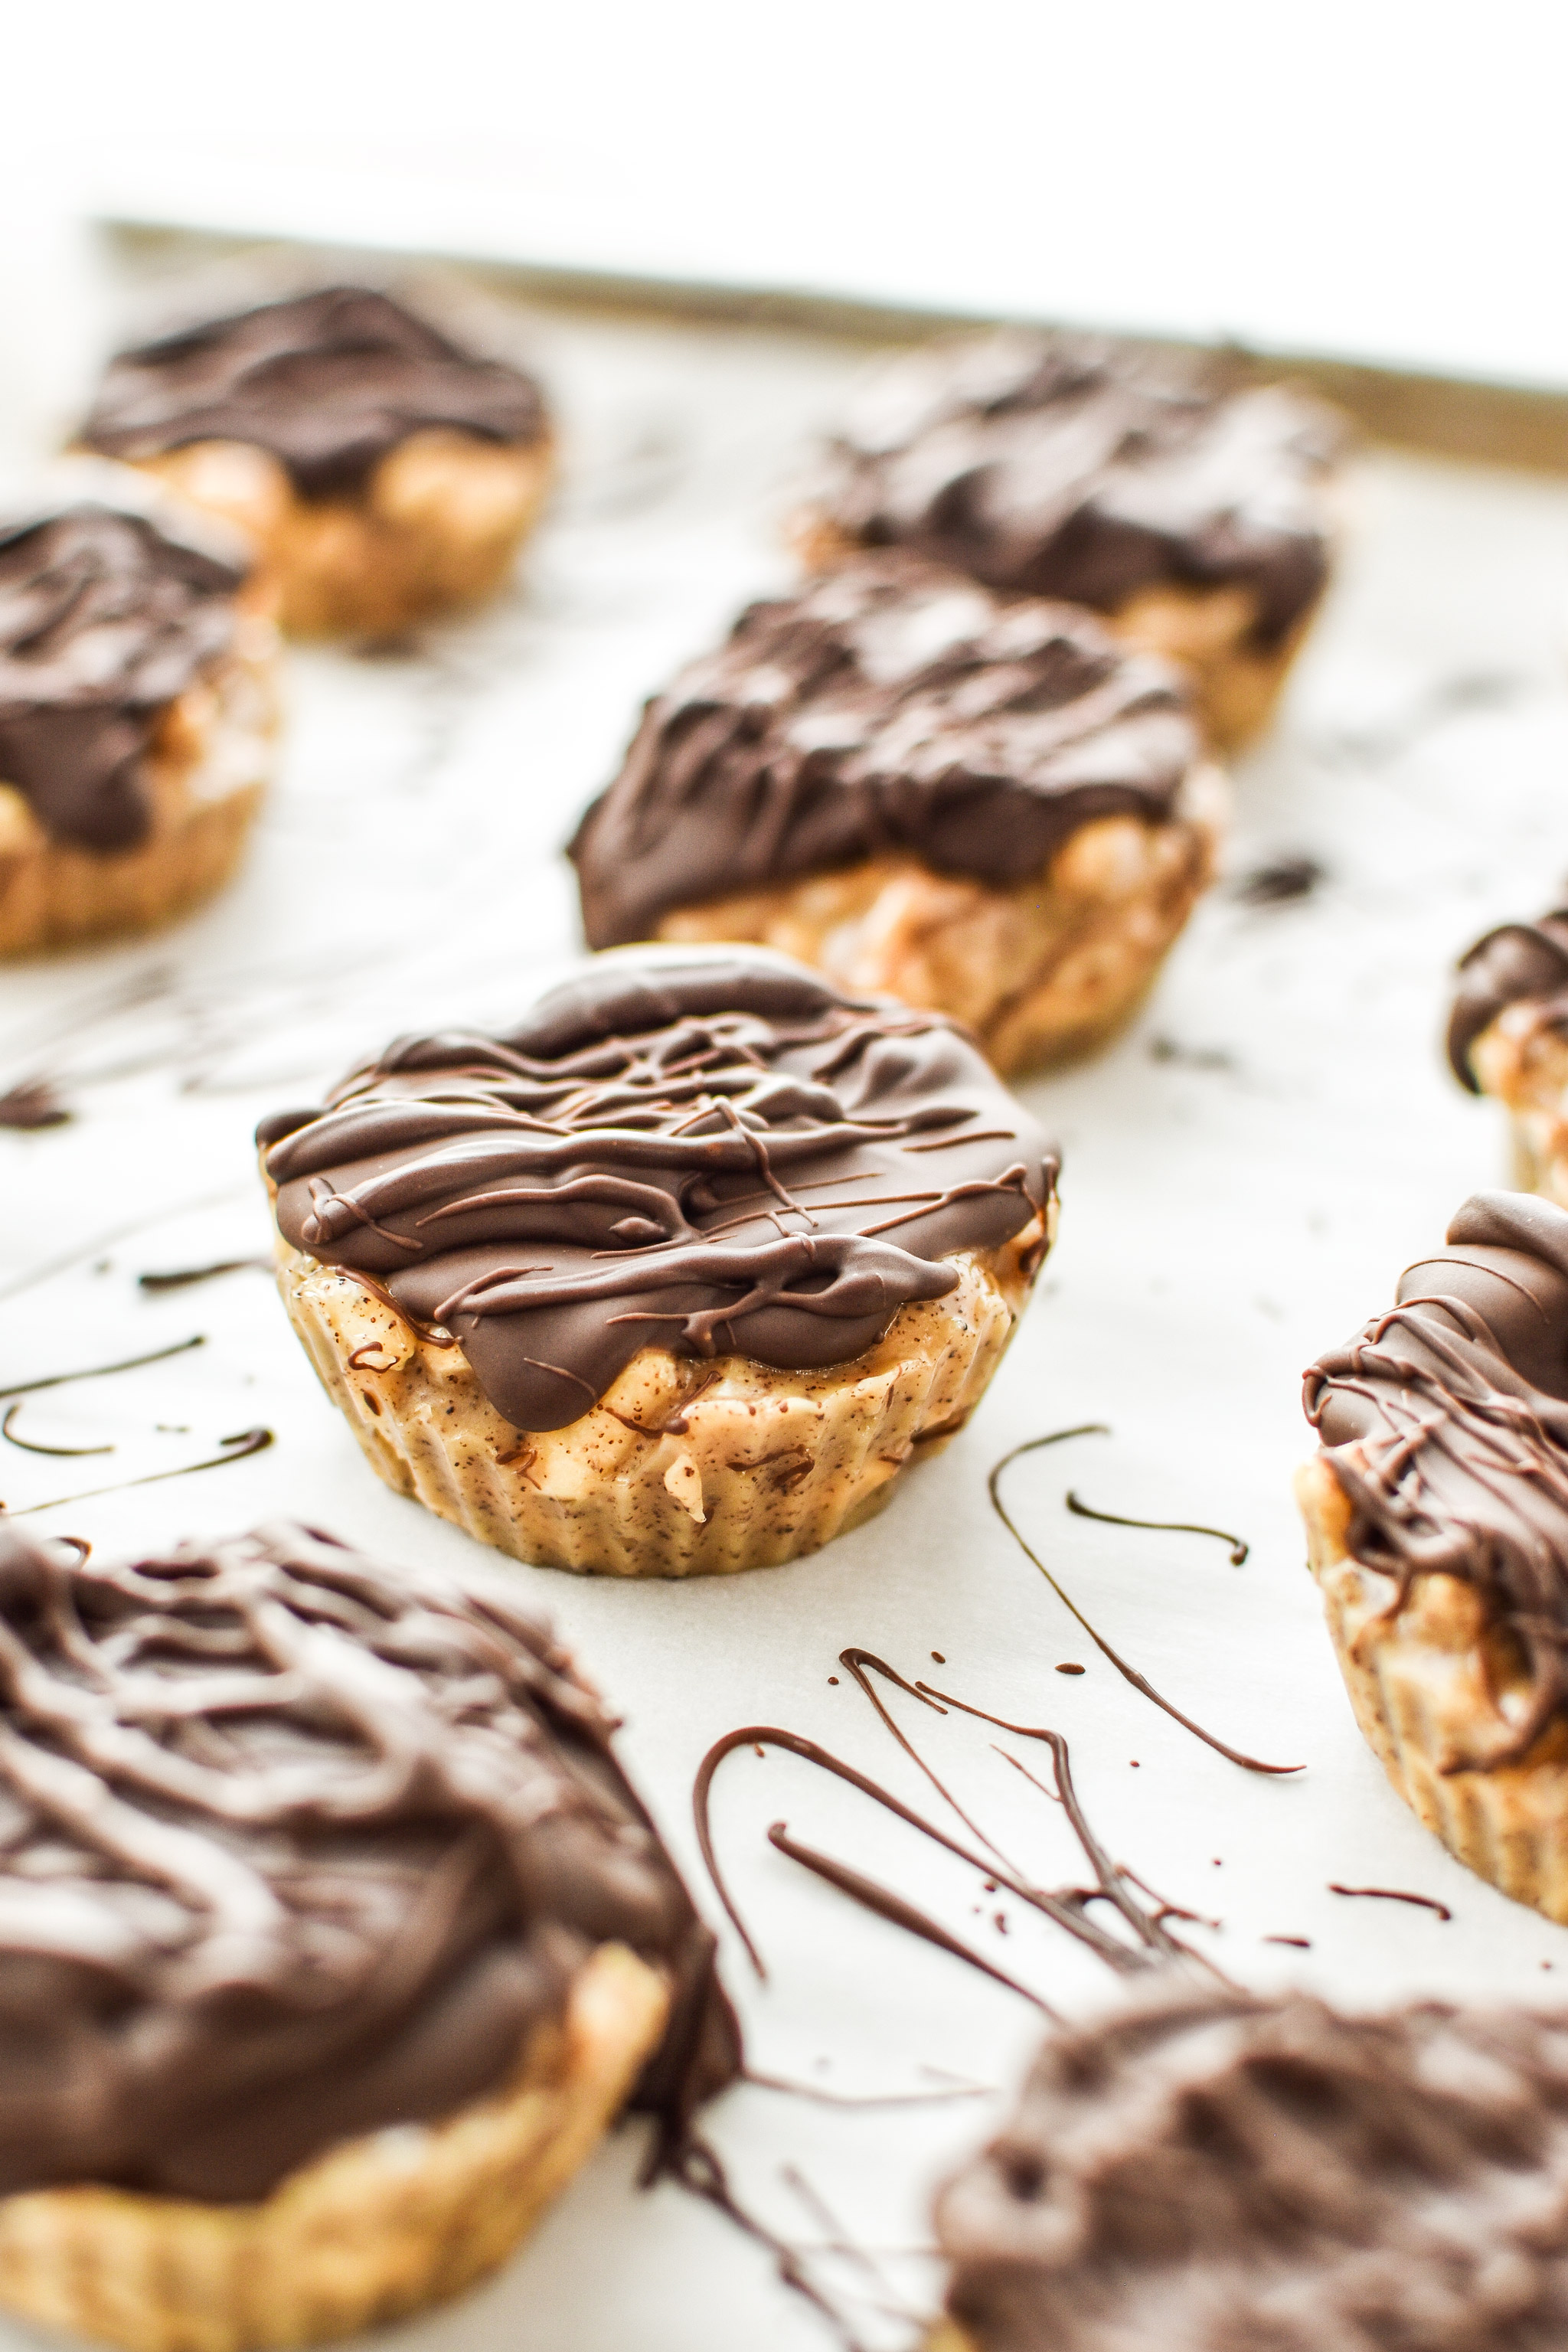 Espresso Crunch Cashew Butter Cups with chocolate drizzled on top.